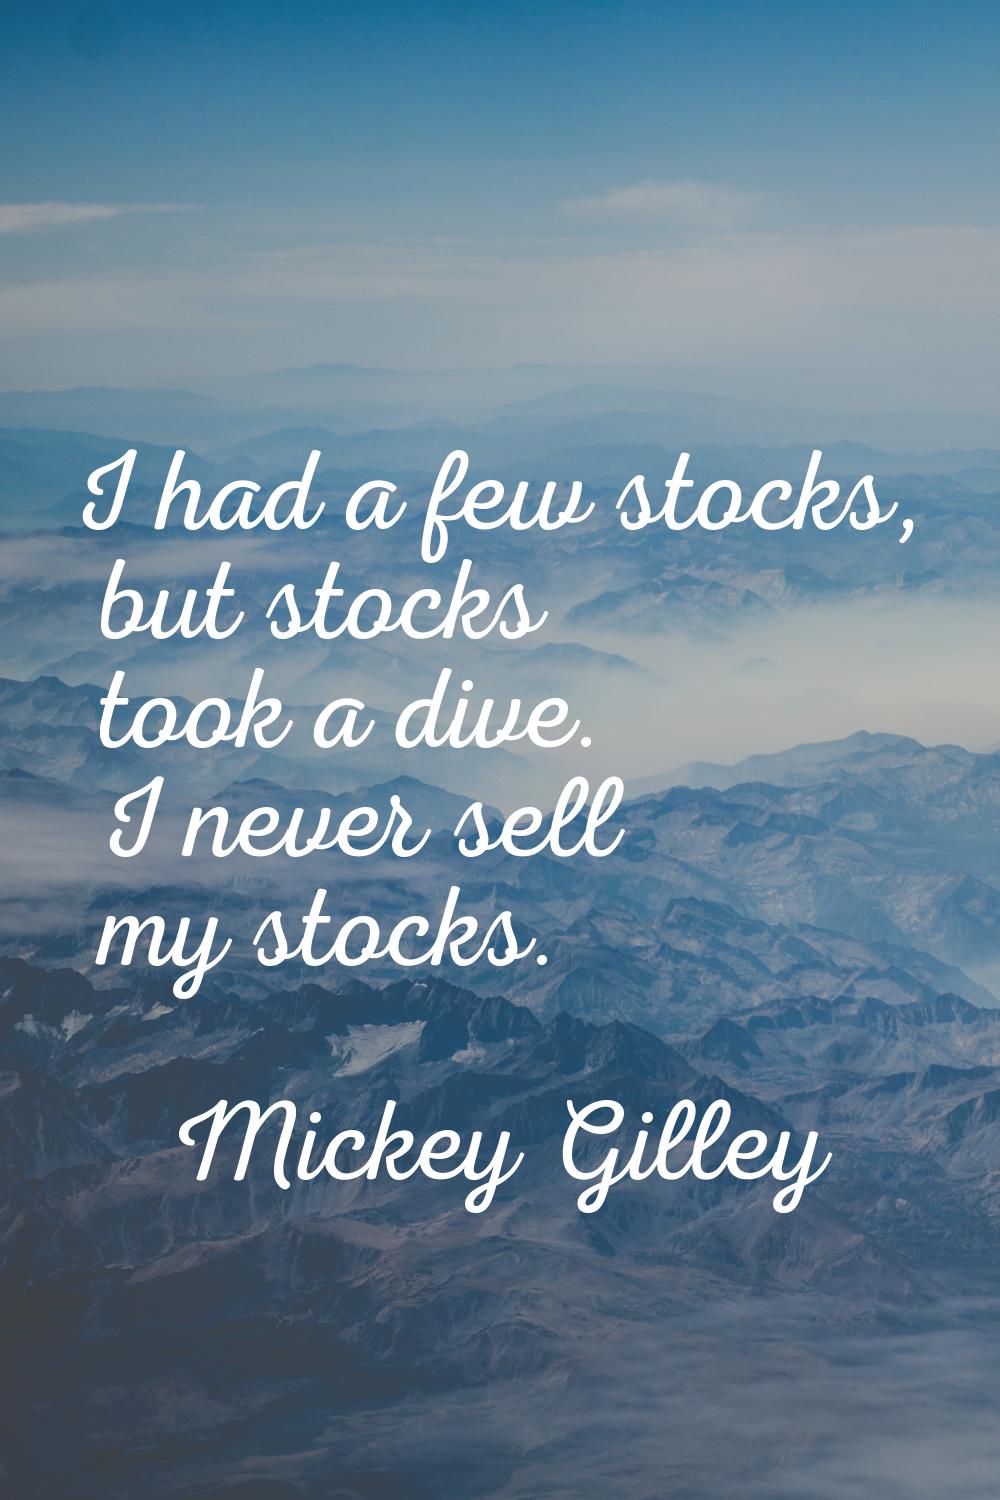 I had a few stocks, but stocks took a dive. I never sell my stocks.